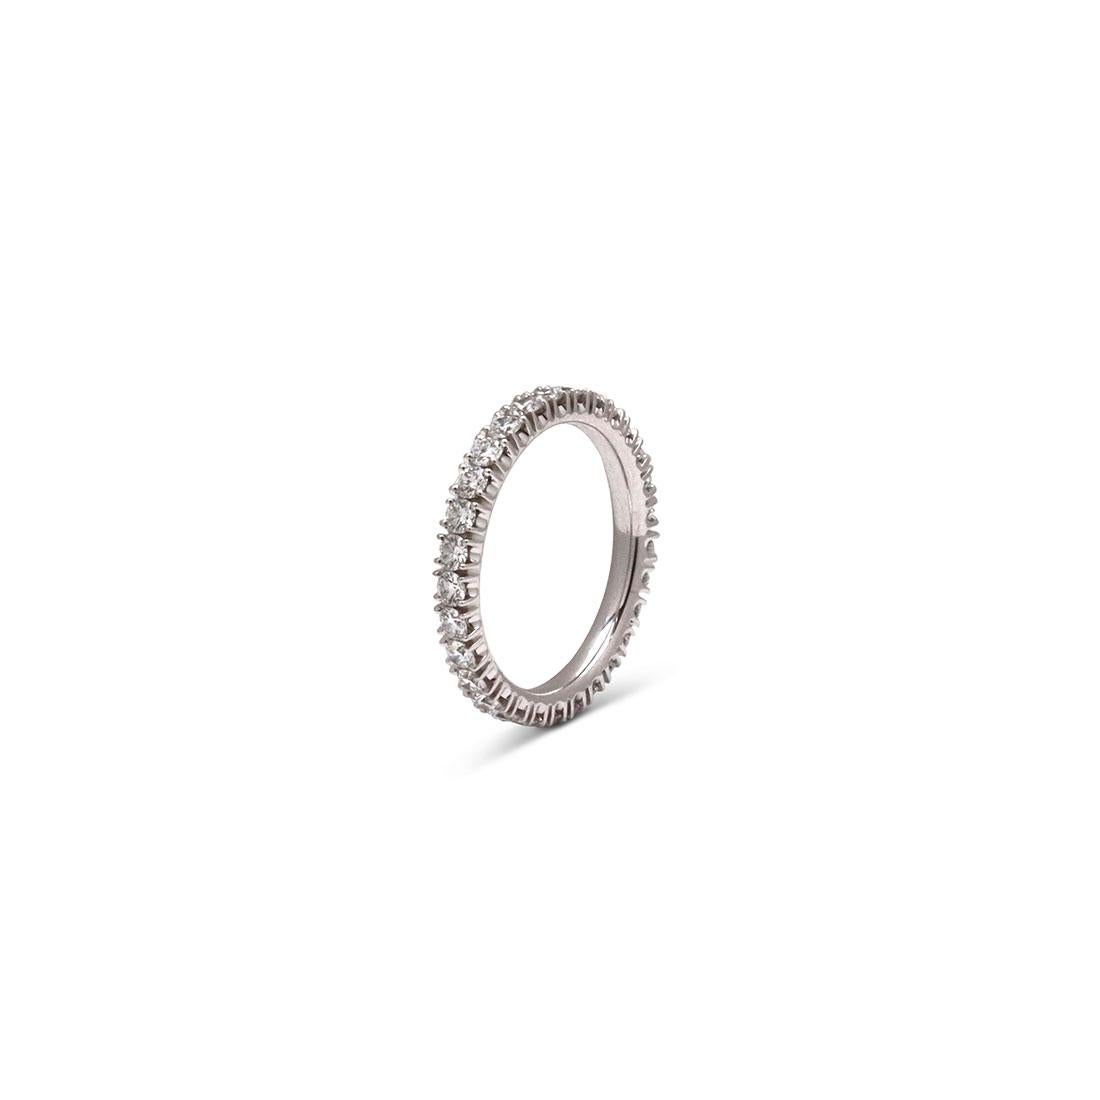 Authentic Cartier 'Étincelle de Cartier' wedding band crafted in platinum, set with round brilliant cut diamonds weighing an estimated 0.93 carats. Signed Cartier, 51, PT950, with serial number and hallmarks. Ring size 51 (US 5 3/4). The ring is